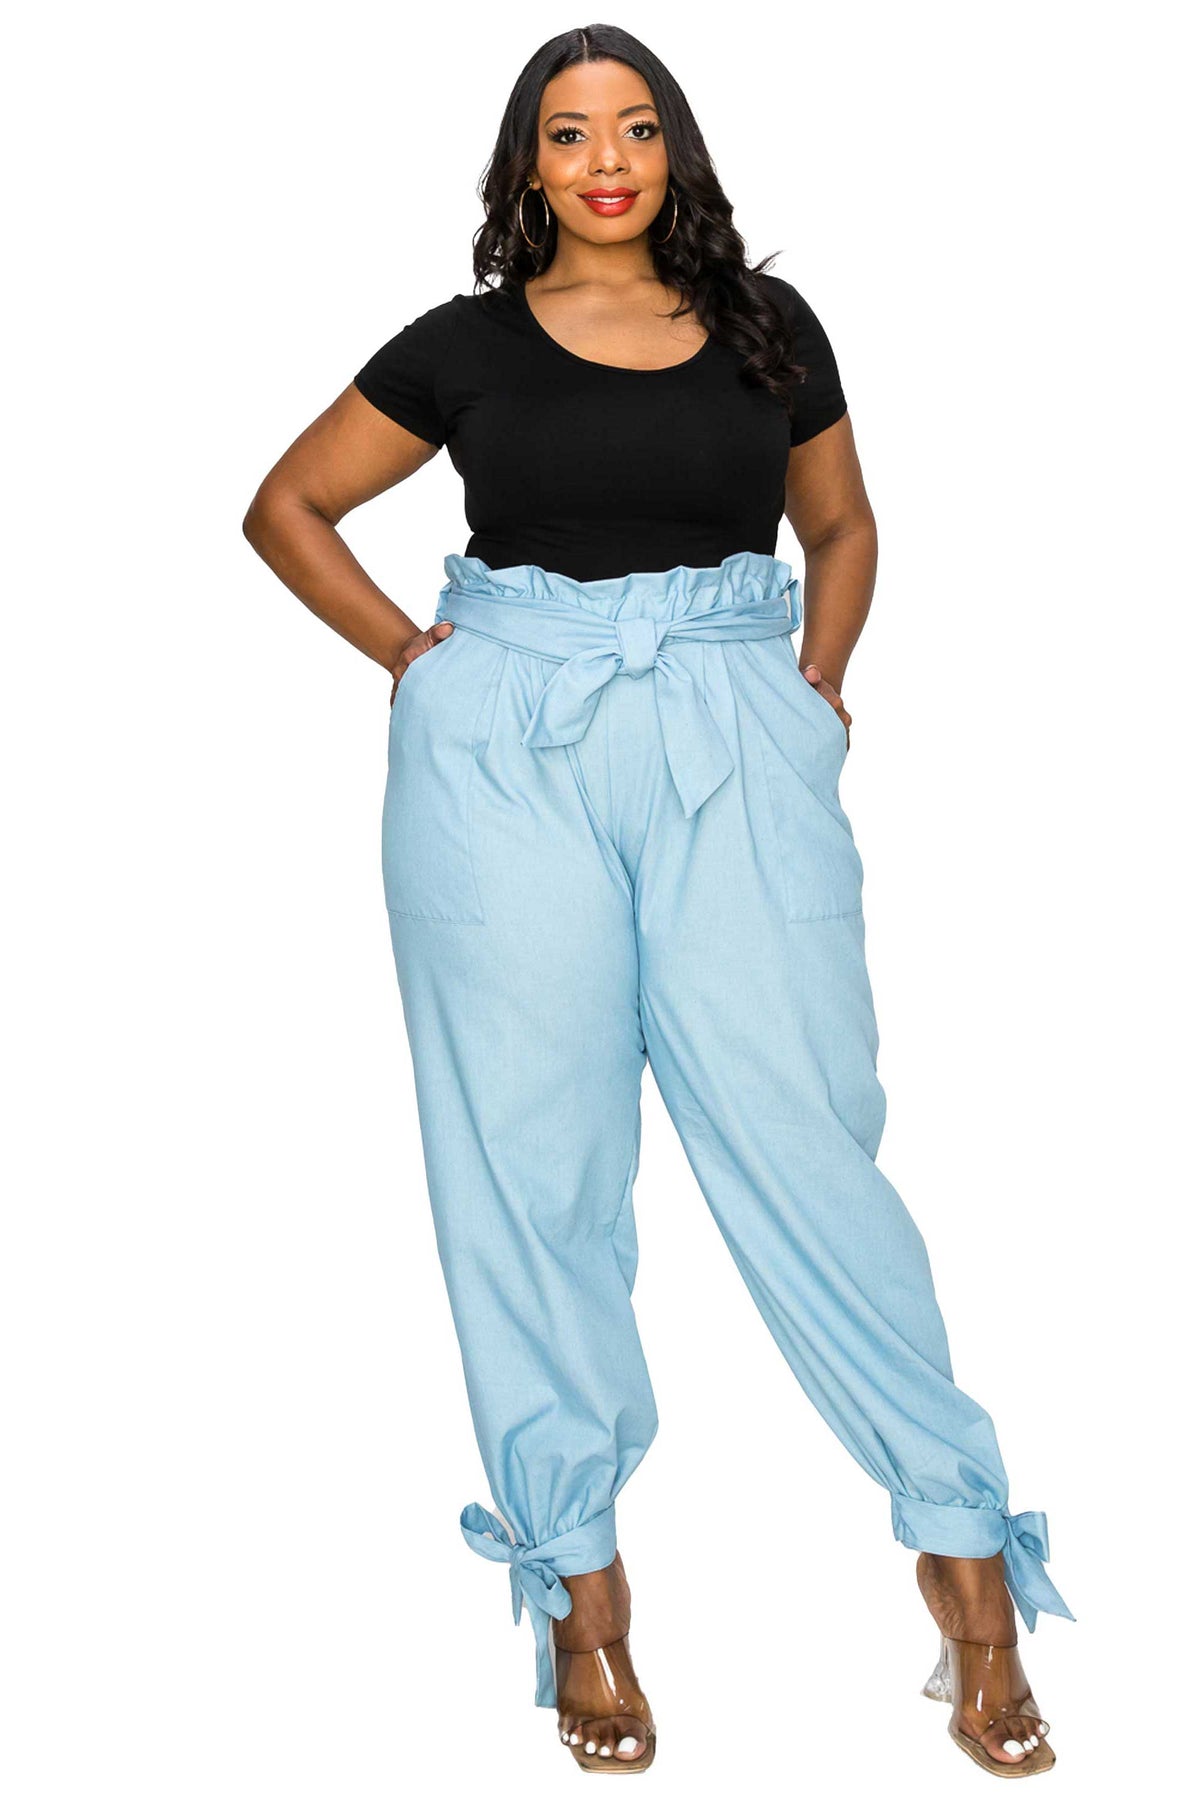 livd apparel plus size boutique contemporary paperbag denim pants with waist tie and leg cuff ribbons in light blue